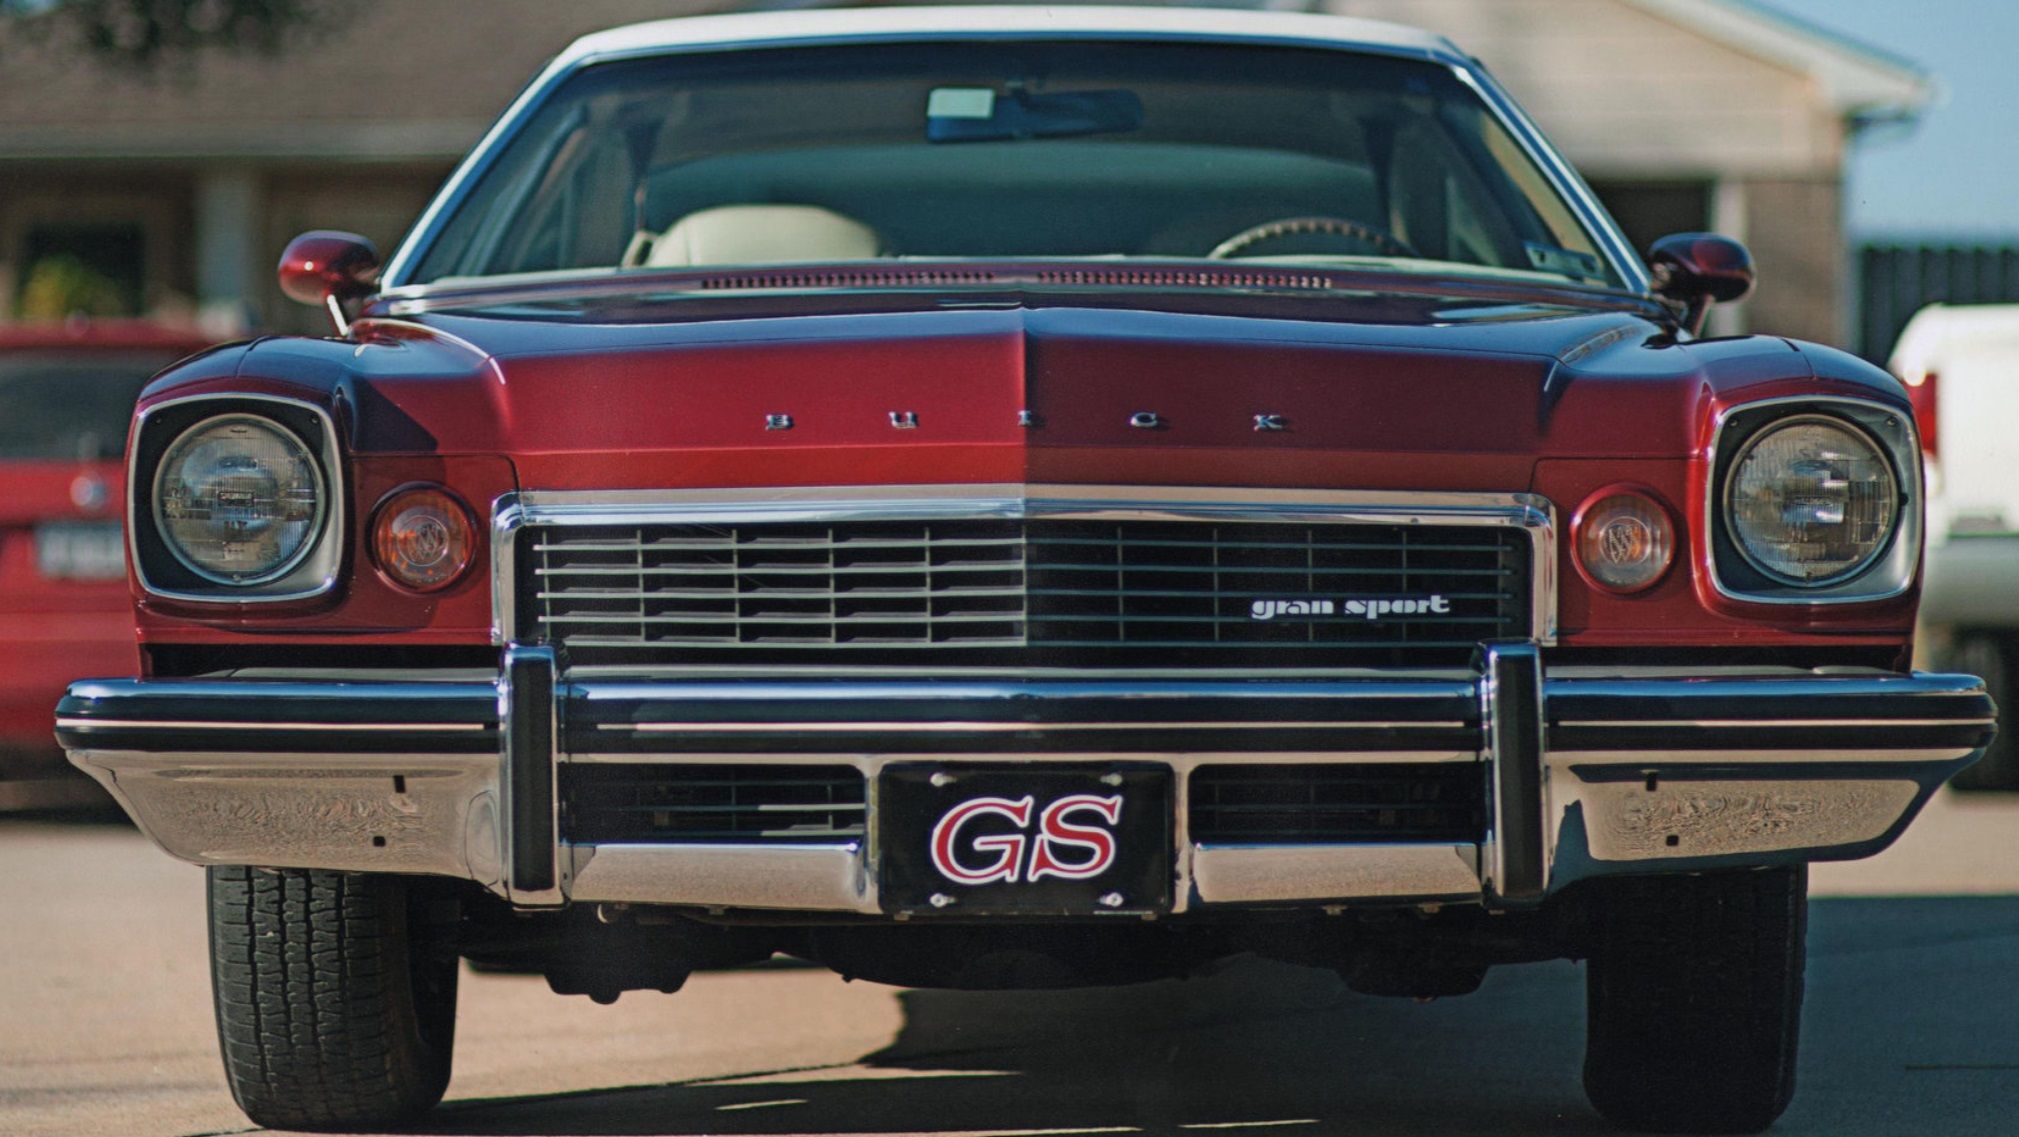 A closer look at the front of the 1974 Buick Gran Sport.